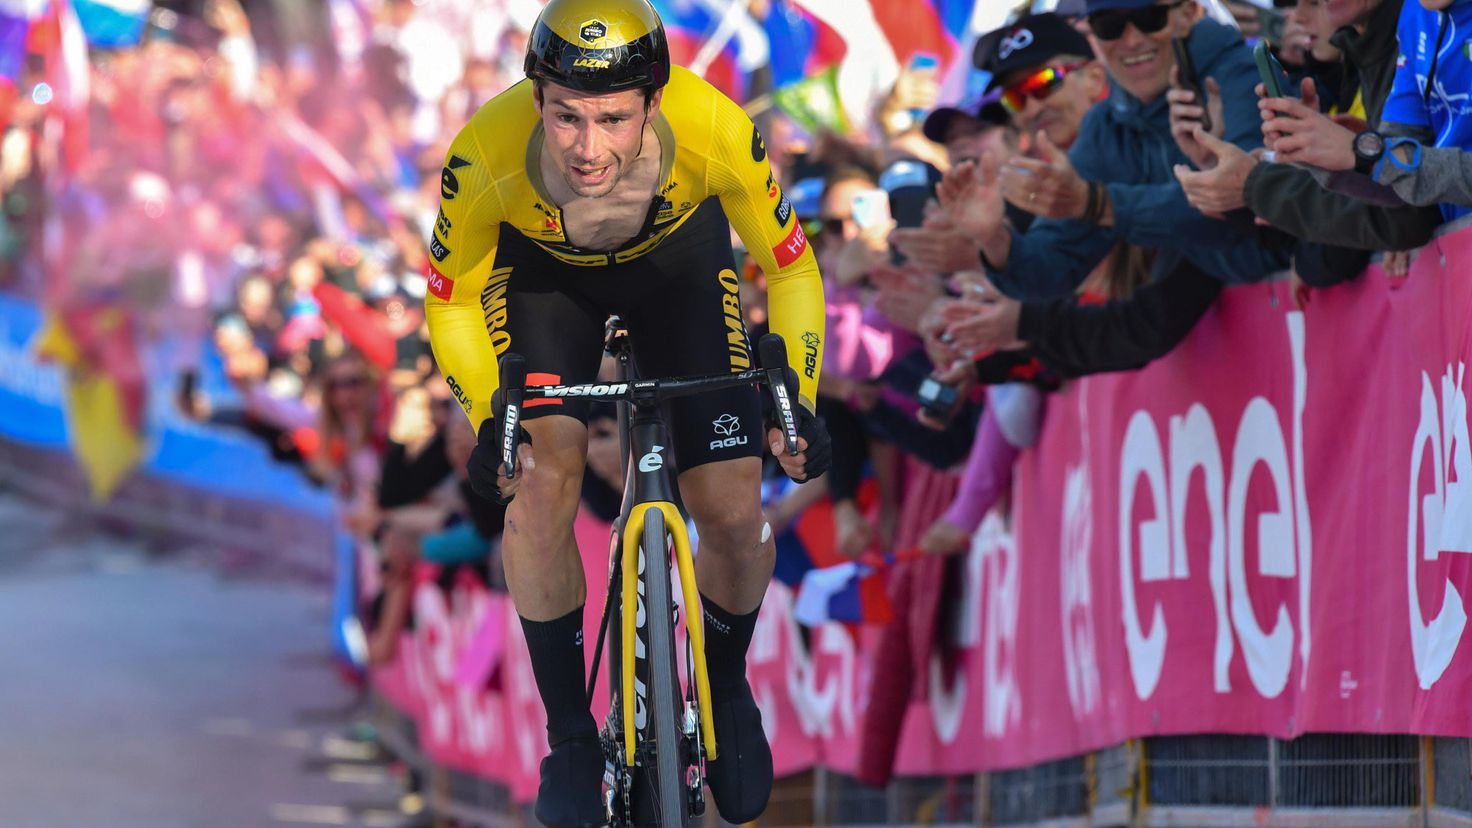 Primoz Roglic wins his first Giro d'Italia with an unforgettable performance in Lussari
